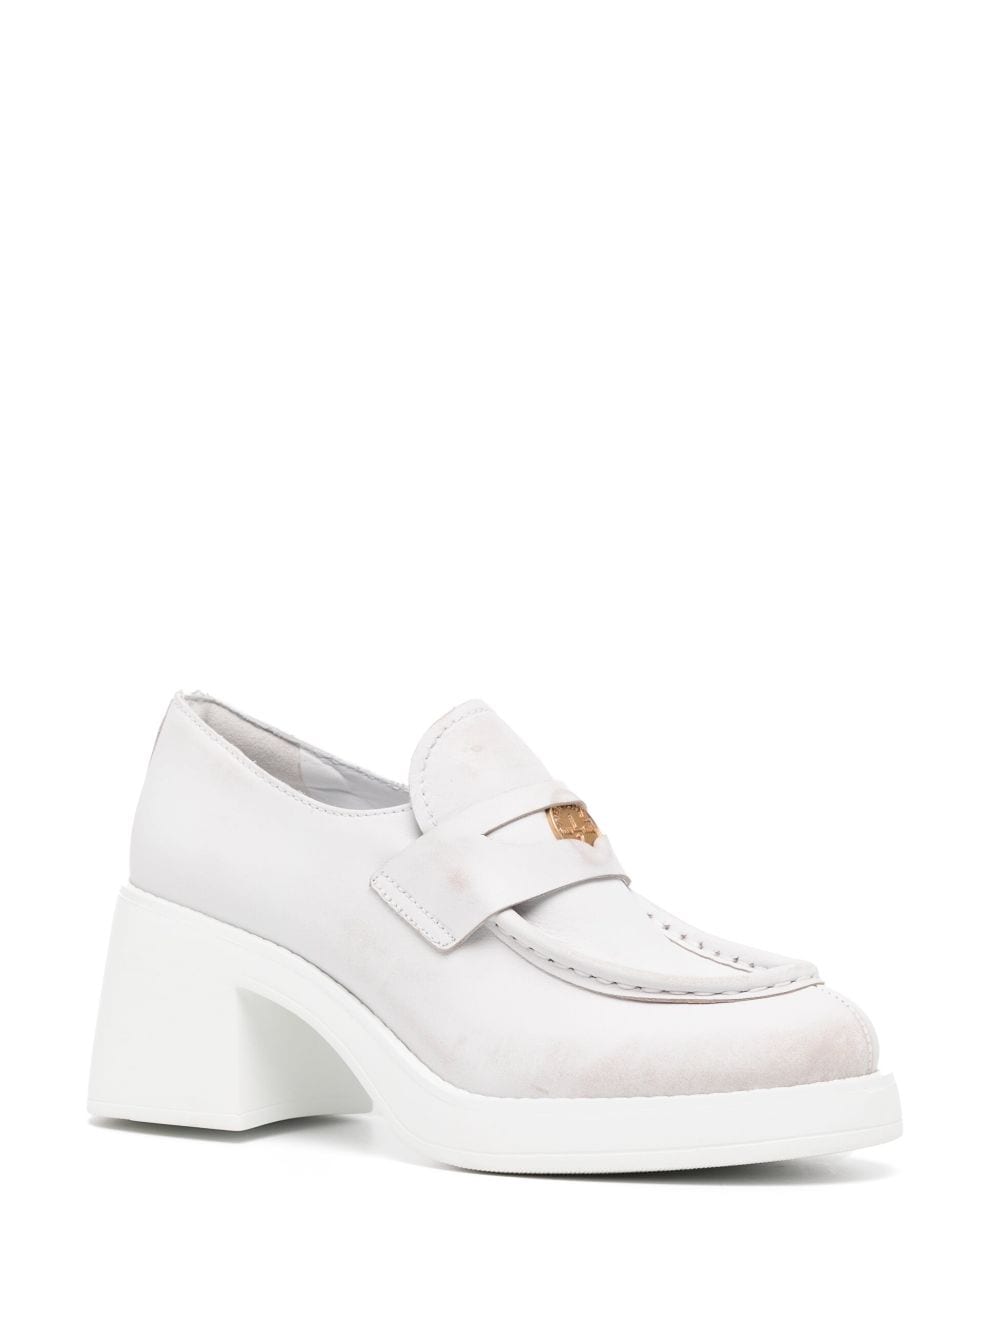 Shop Miu Miu 70mm Leather Penny Loafers In White